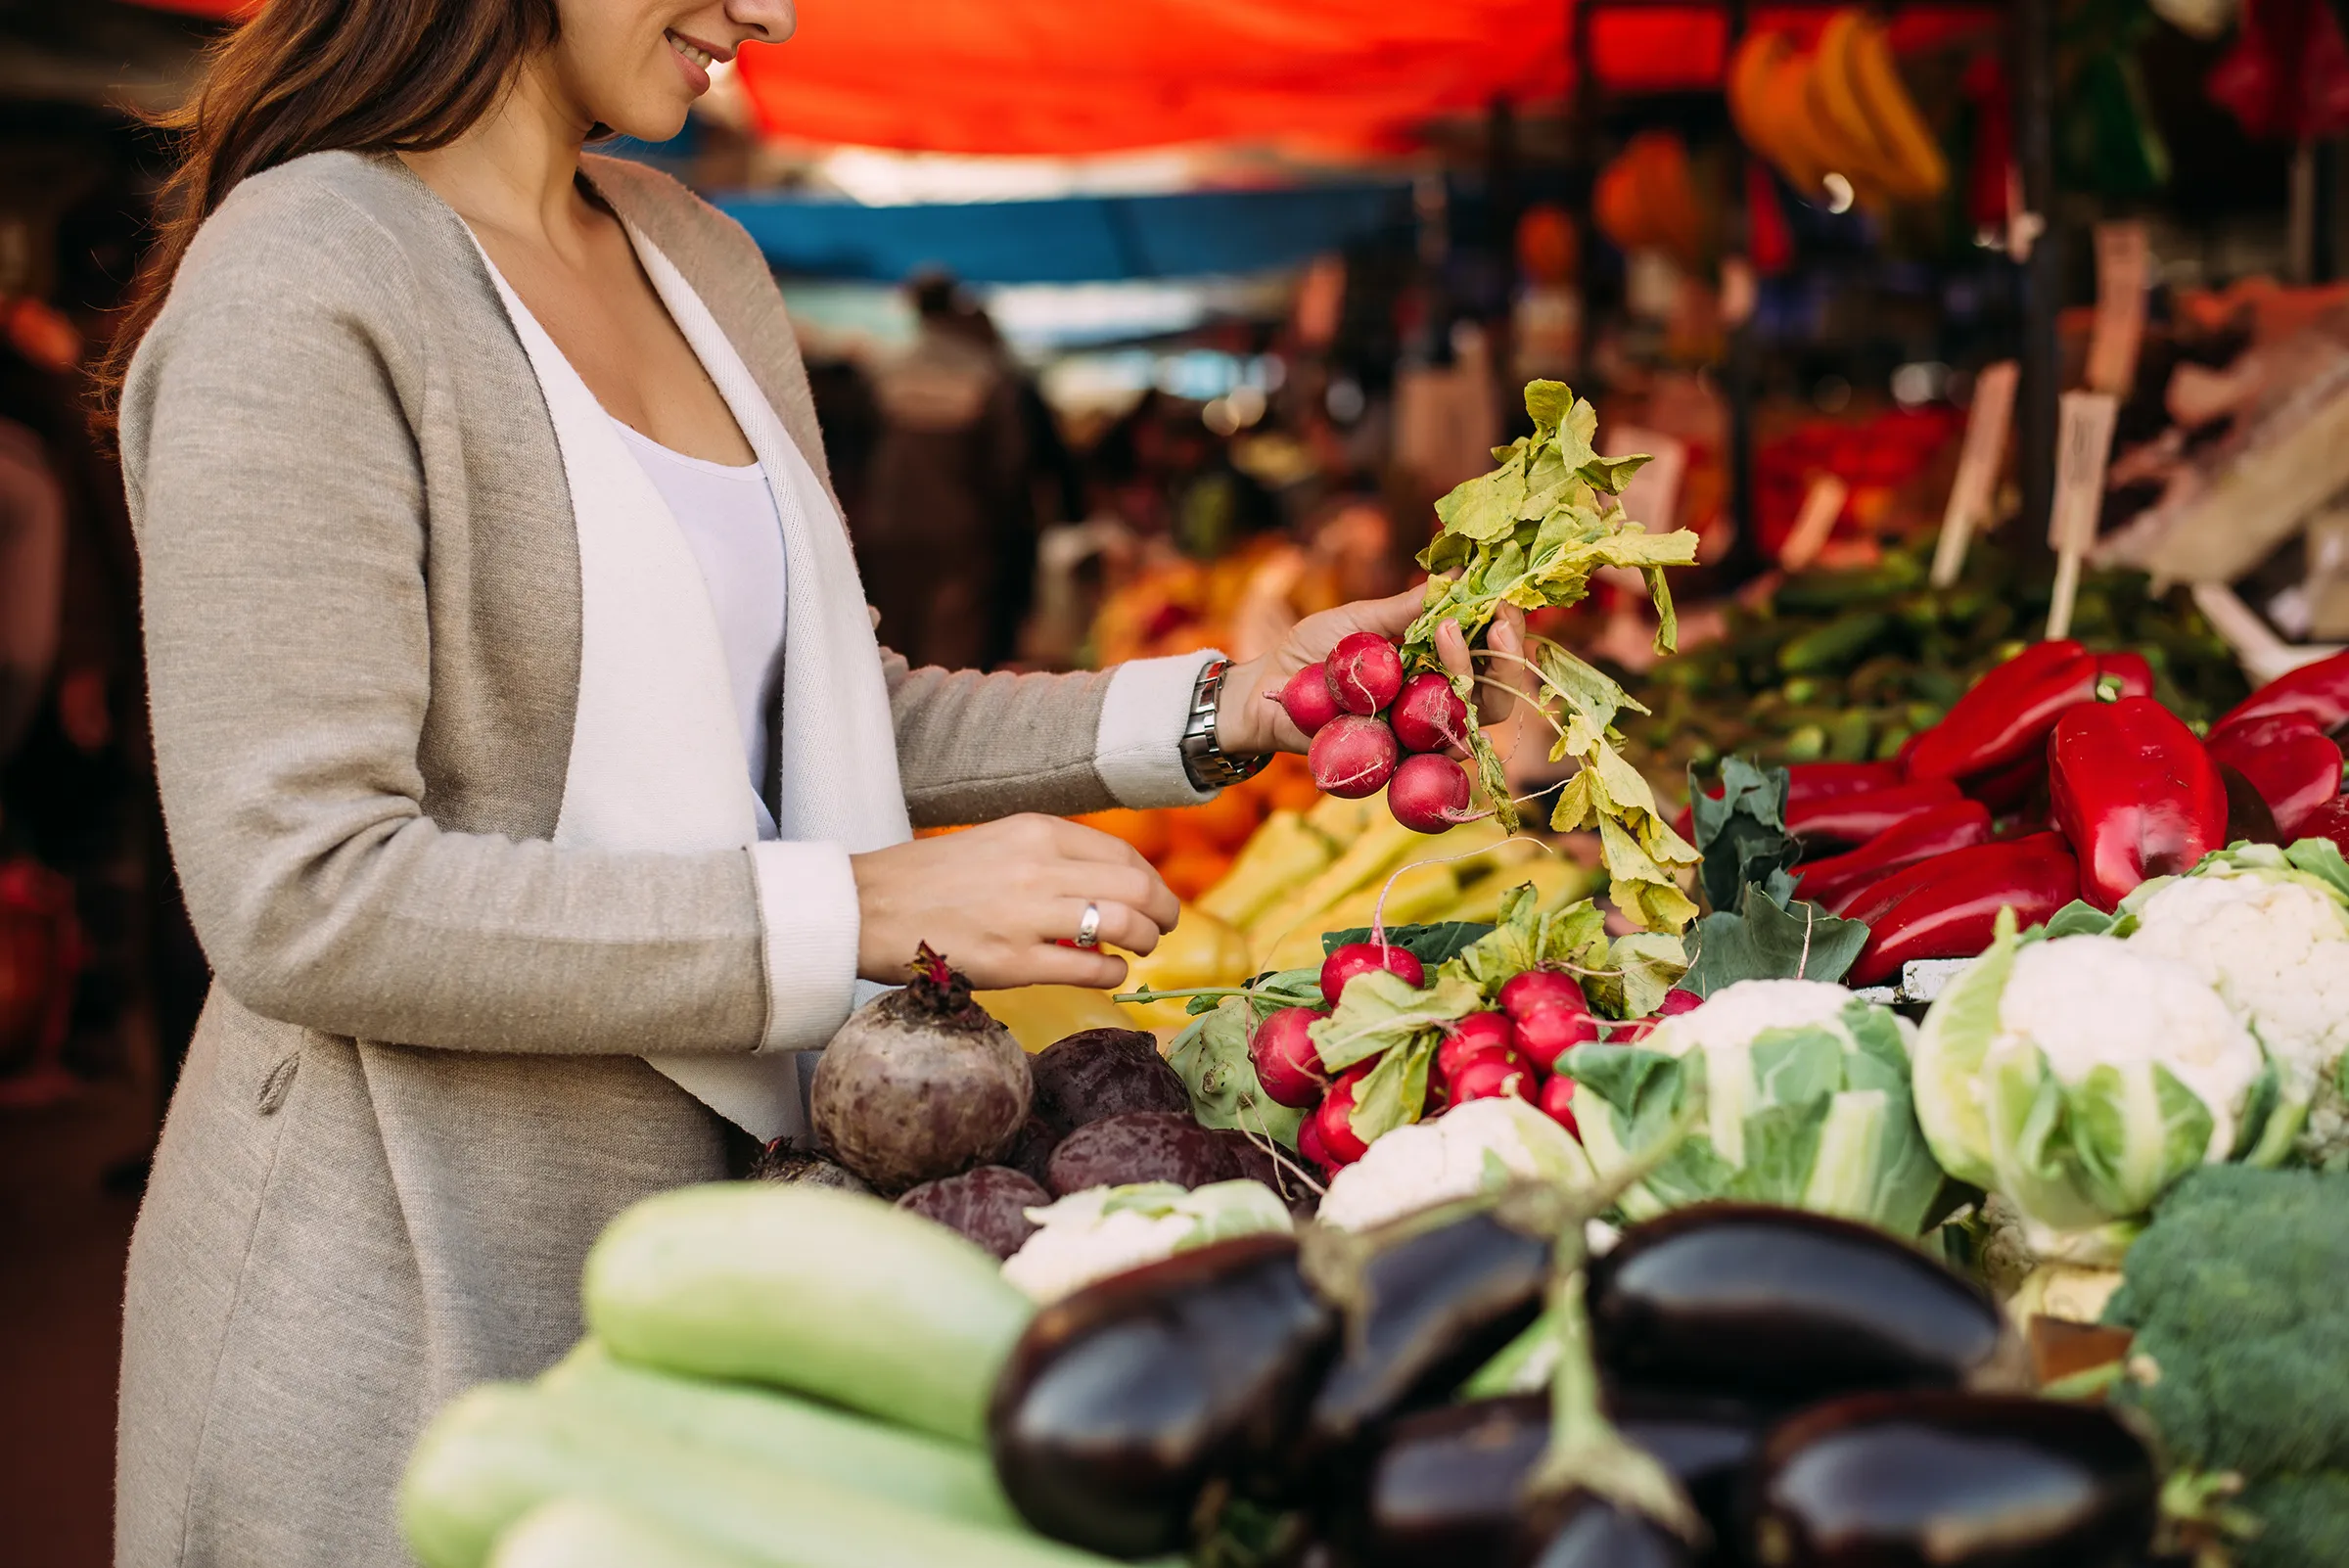 Woman smiling in farmers market with fresh vegetables